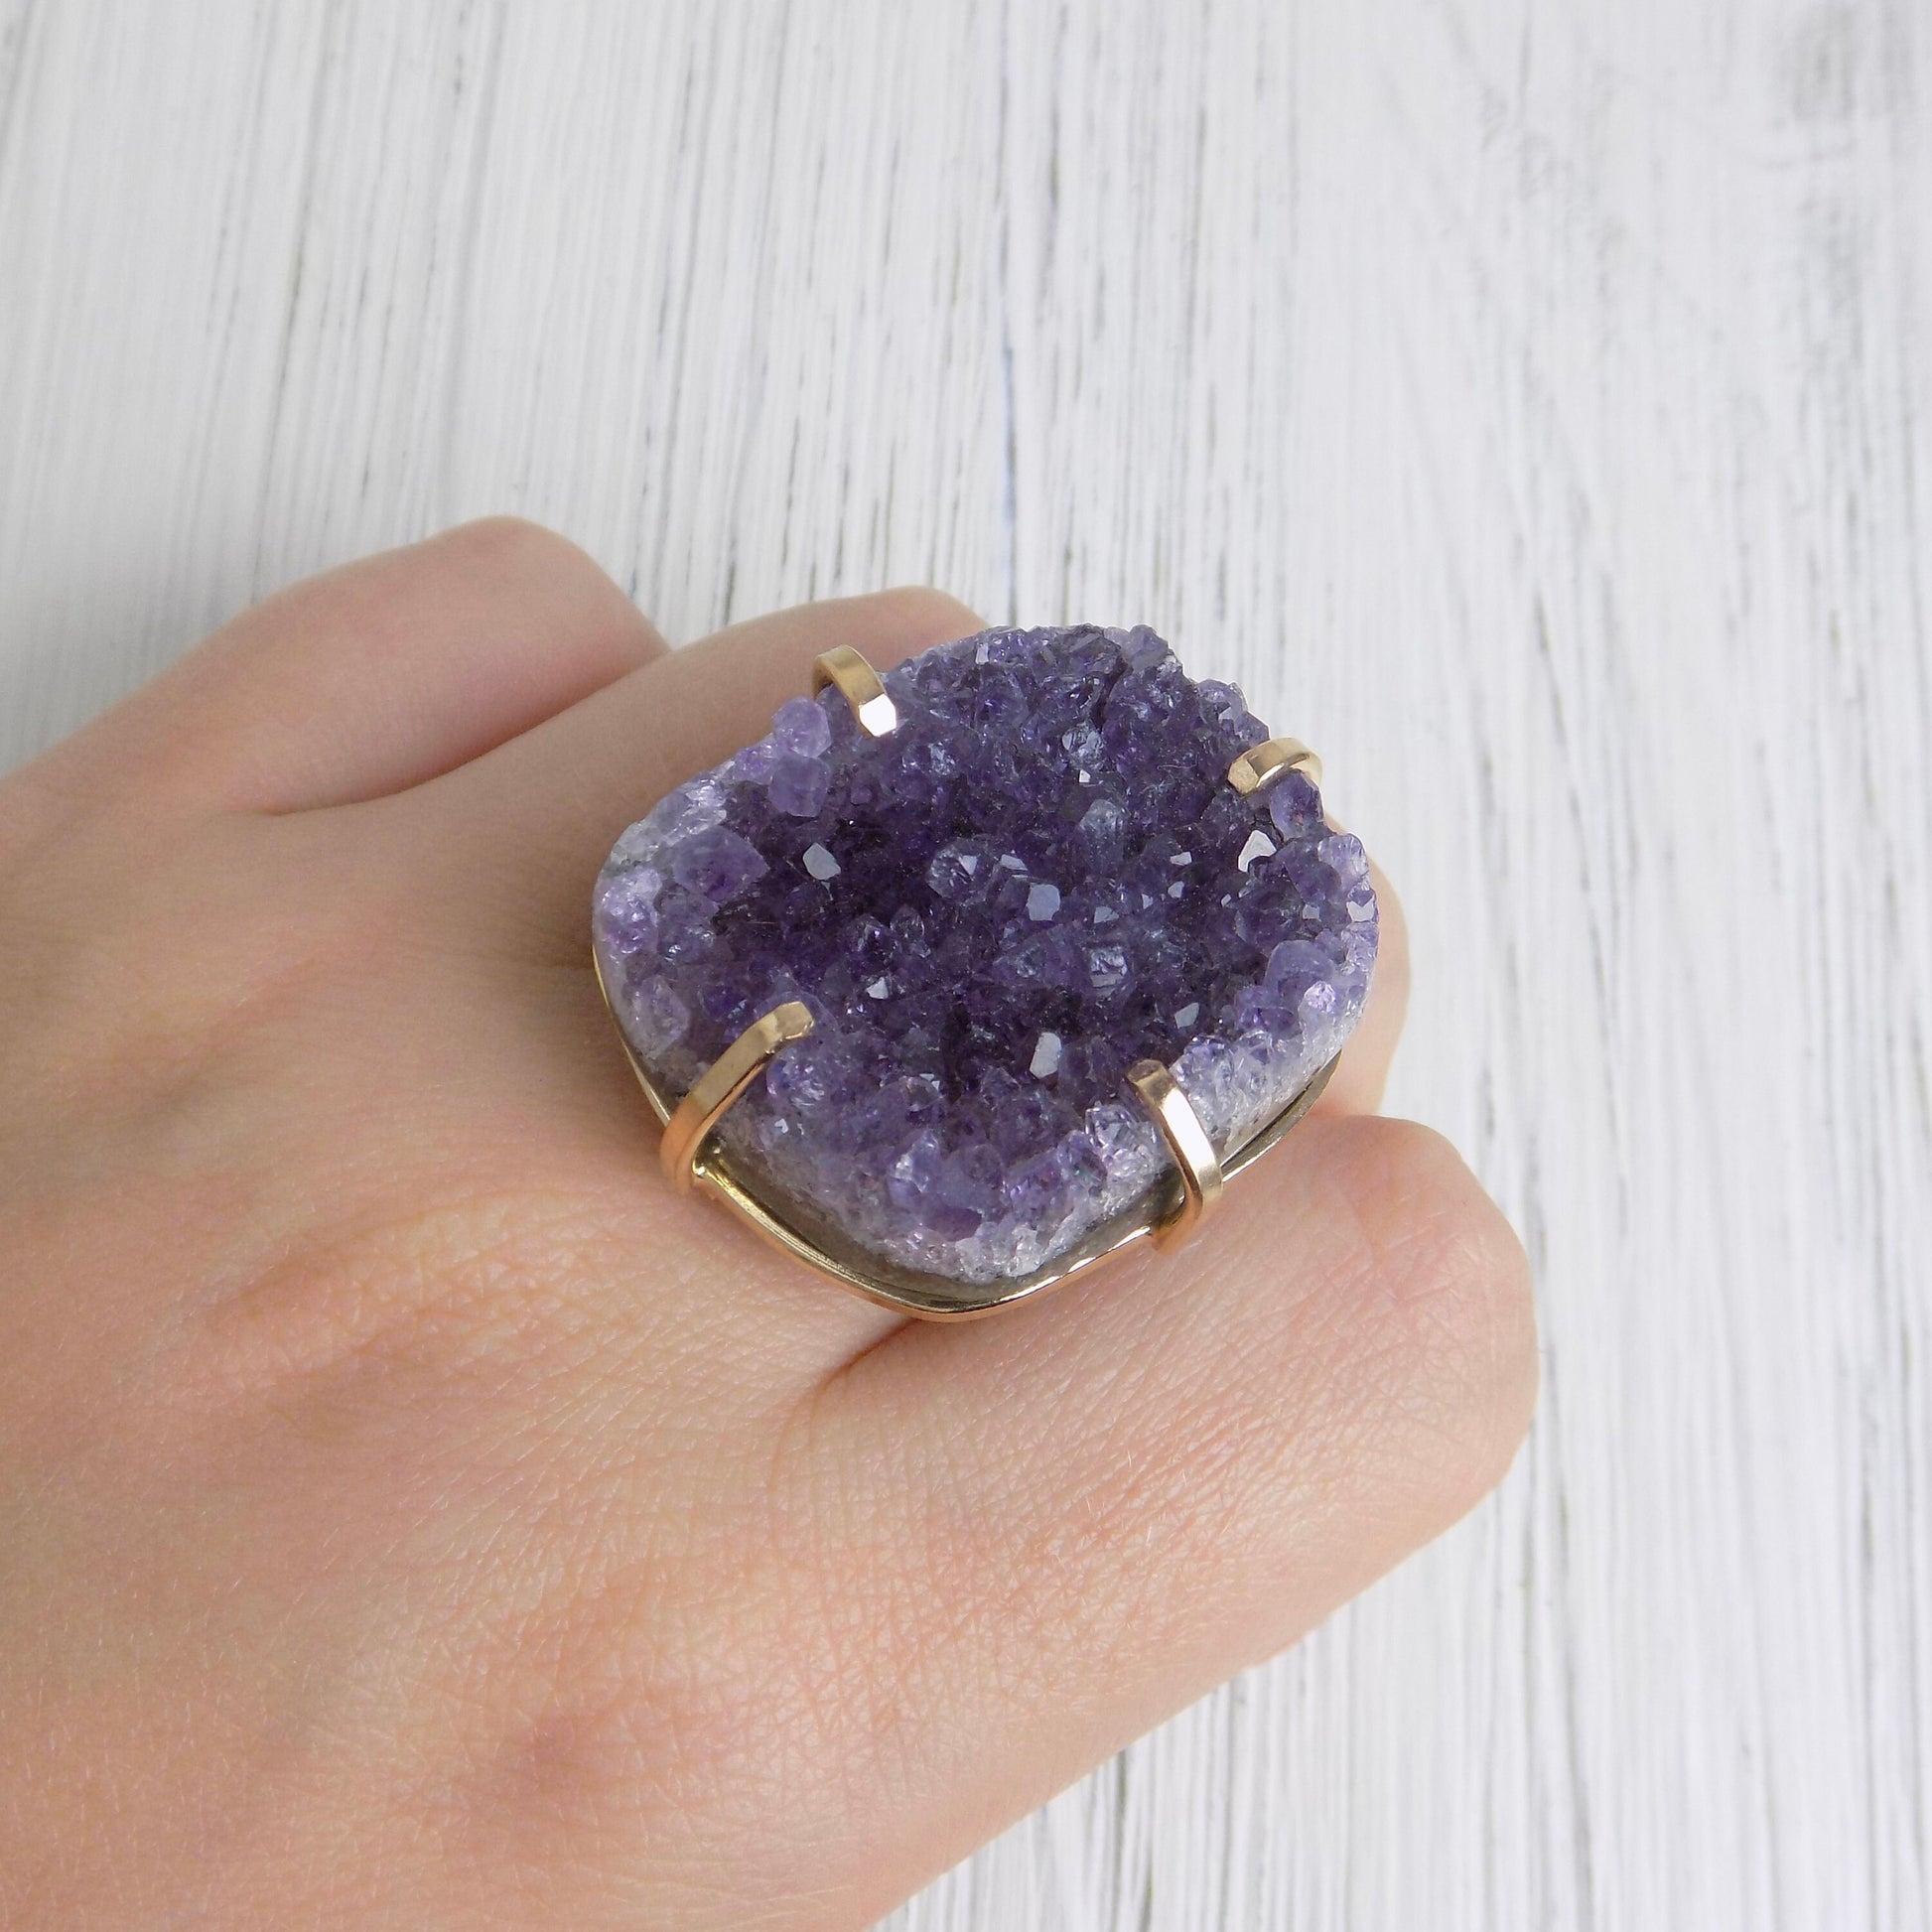 Large Raw Amethyst Druzy Ring Gold Adjustable, Purple Crystal Statement Rings For Women, G14-207